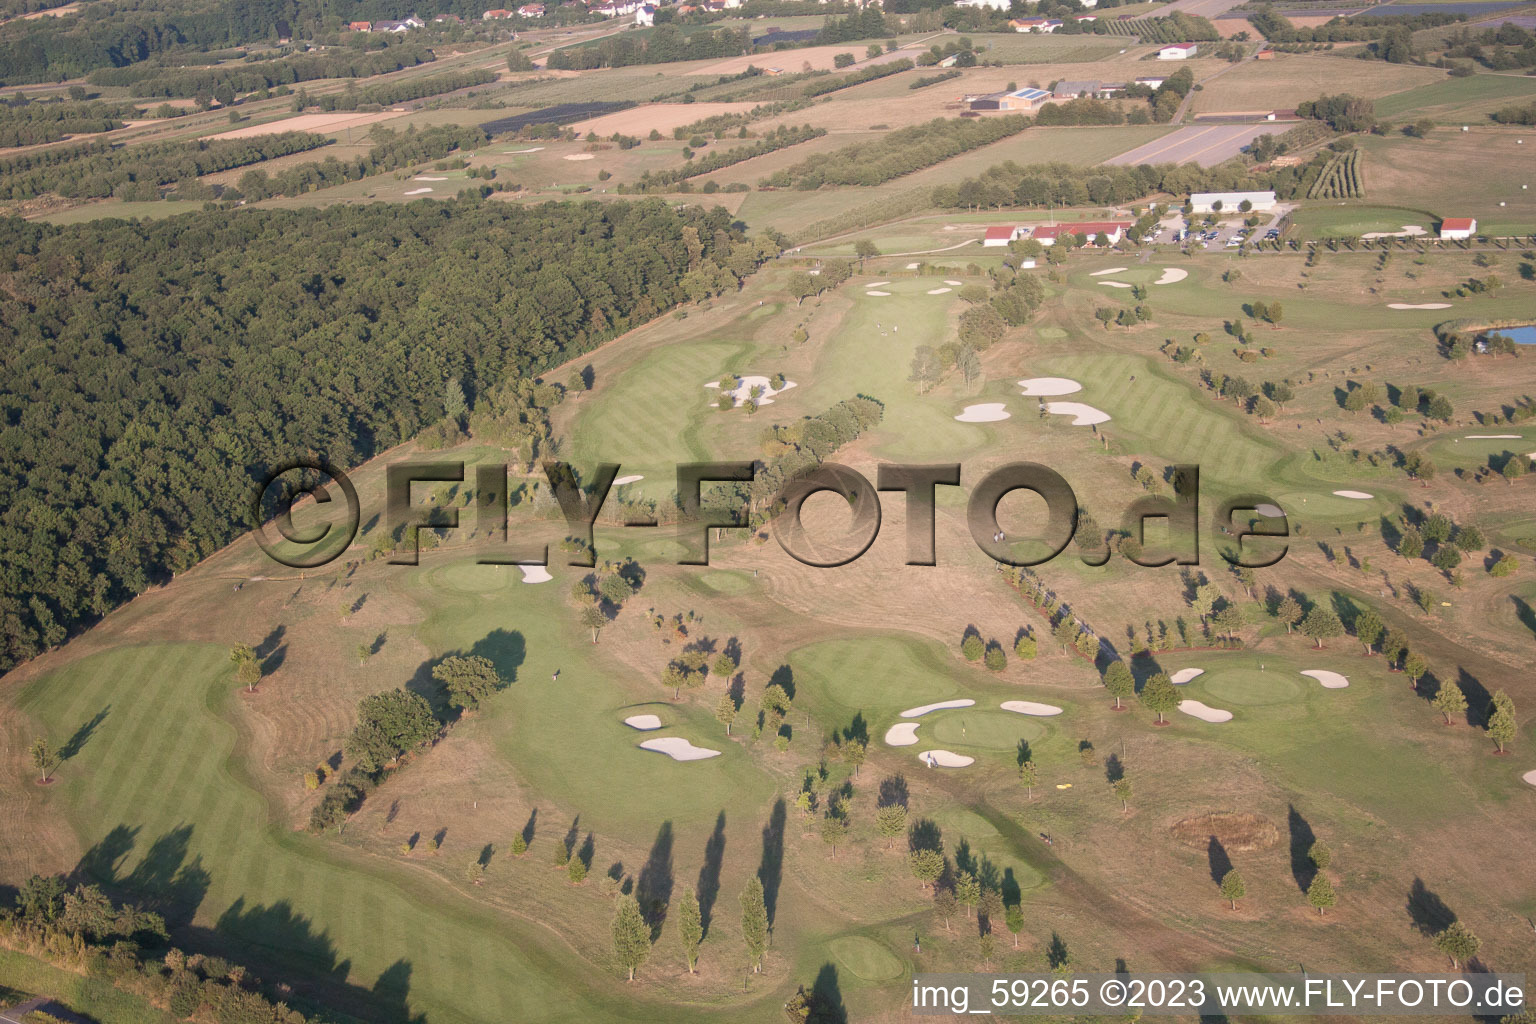 Golf club Urloffen in the district Urloffen in Appenweier in the state Baden-Wuerttemberg, Germany from the drone perspective